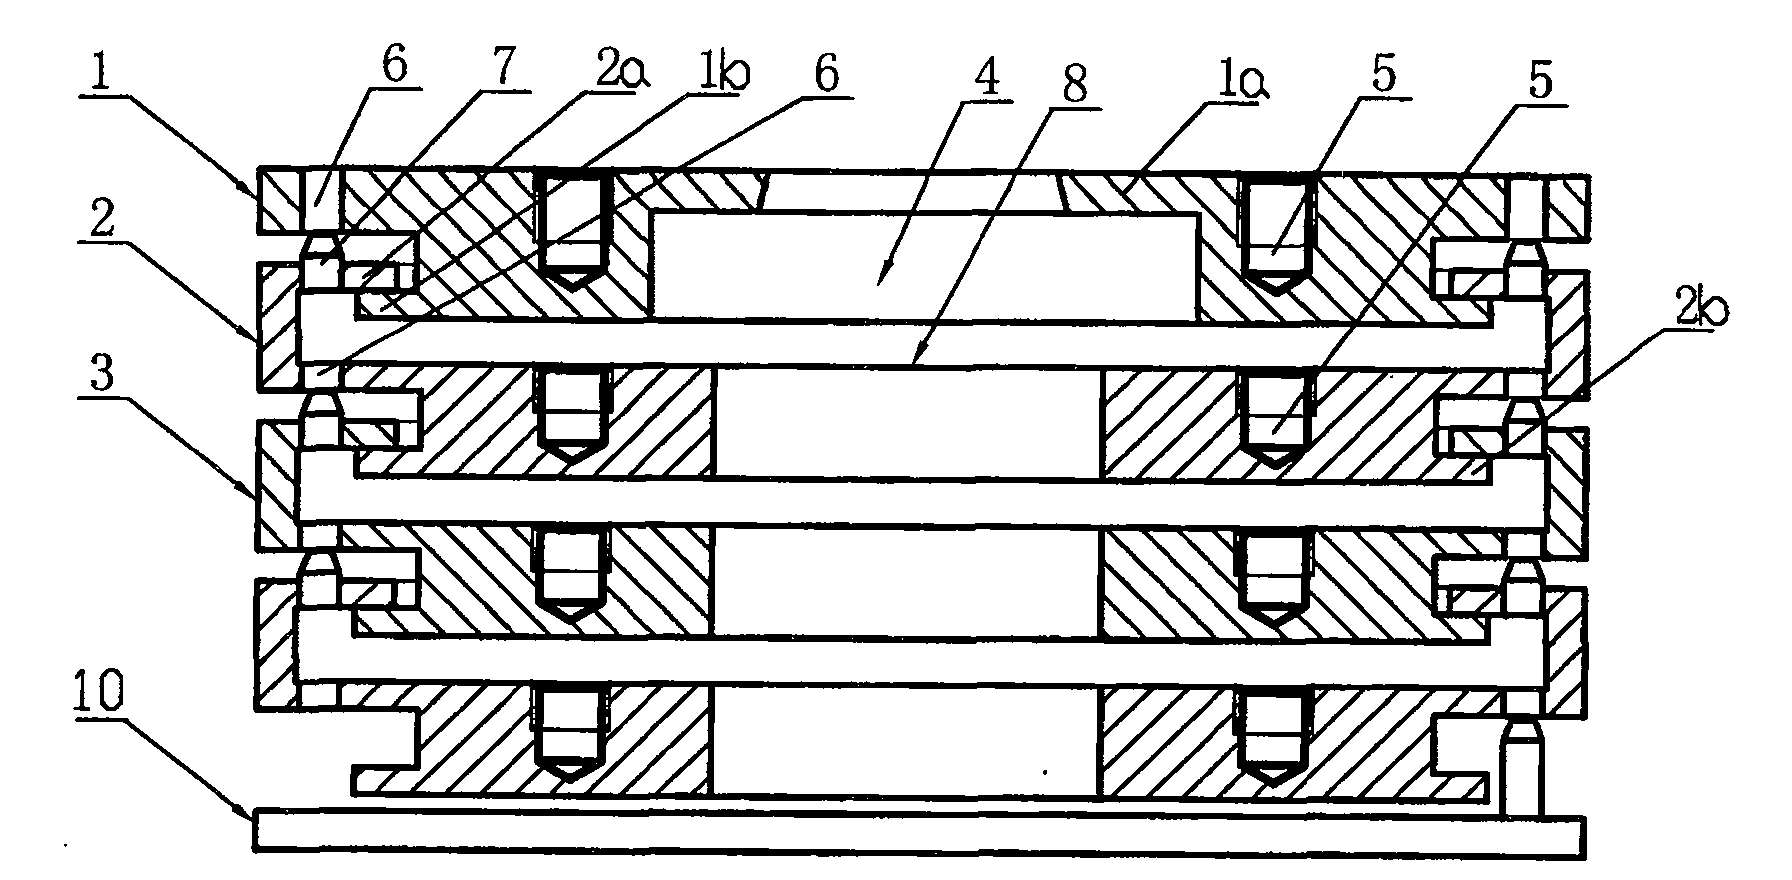 Weights of standard machine loading device